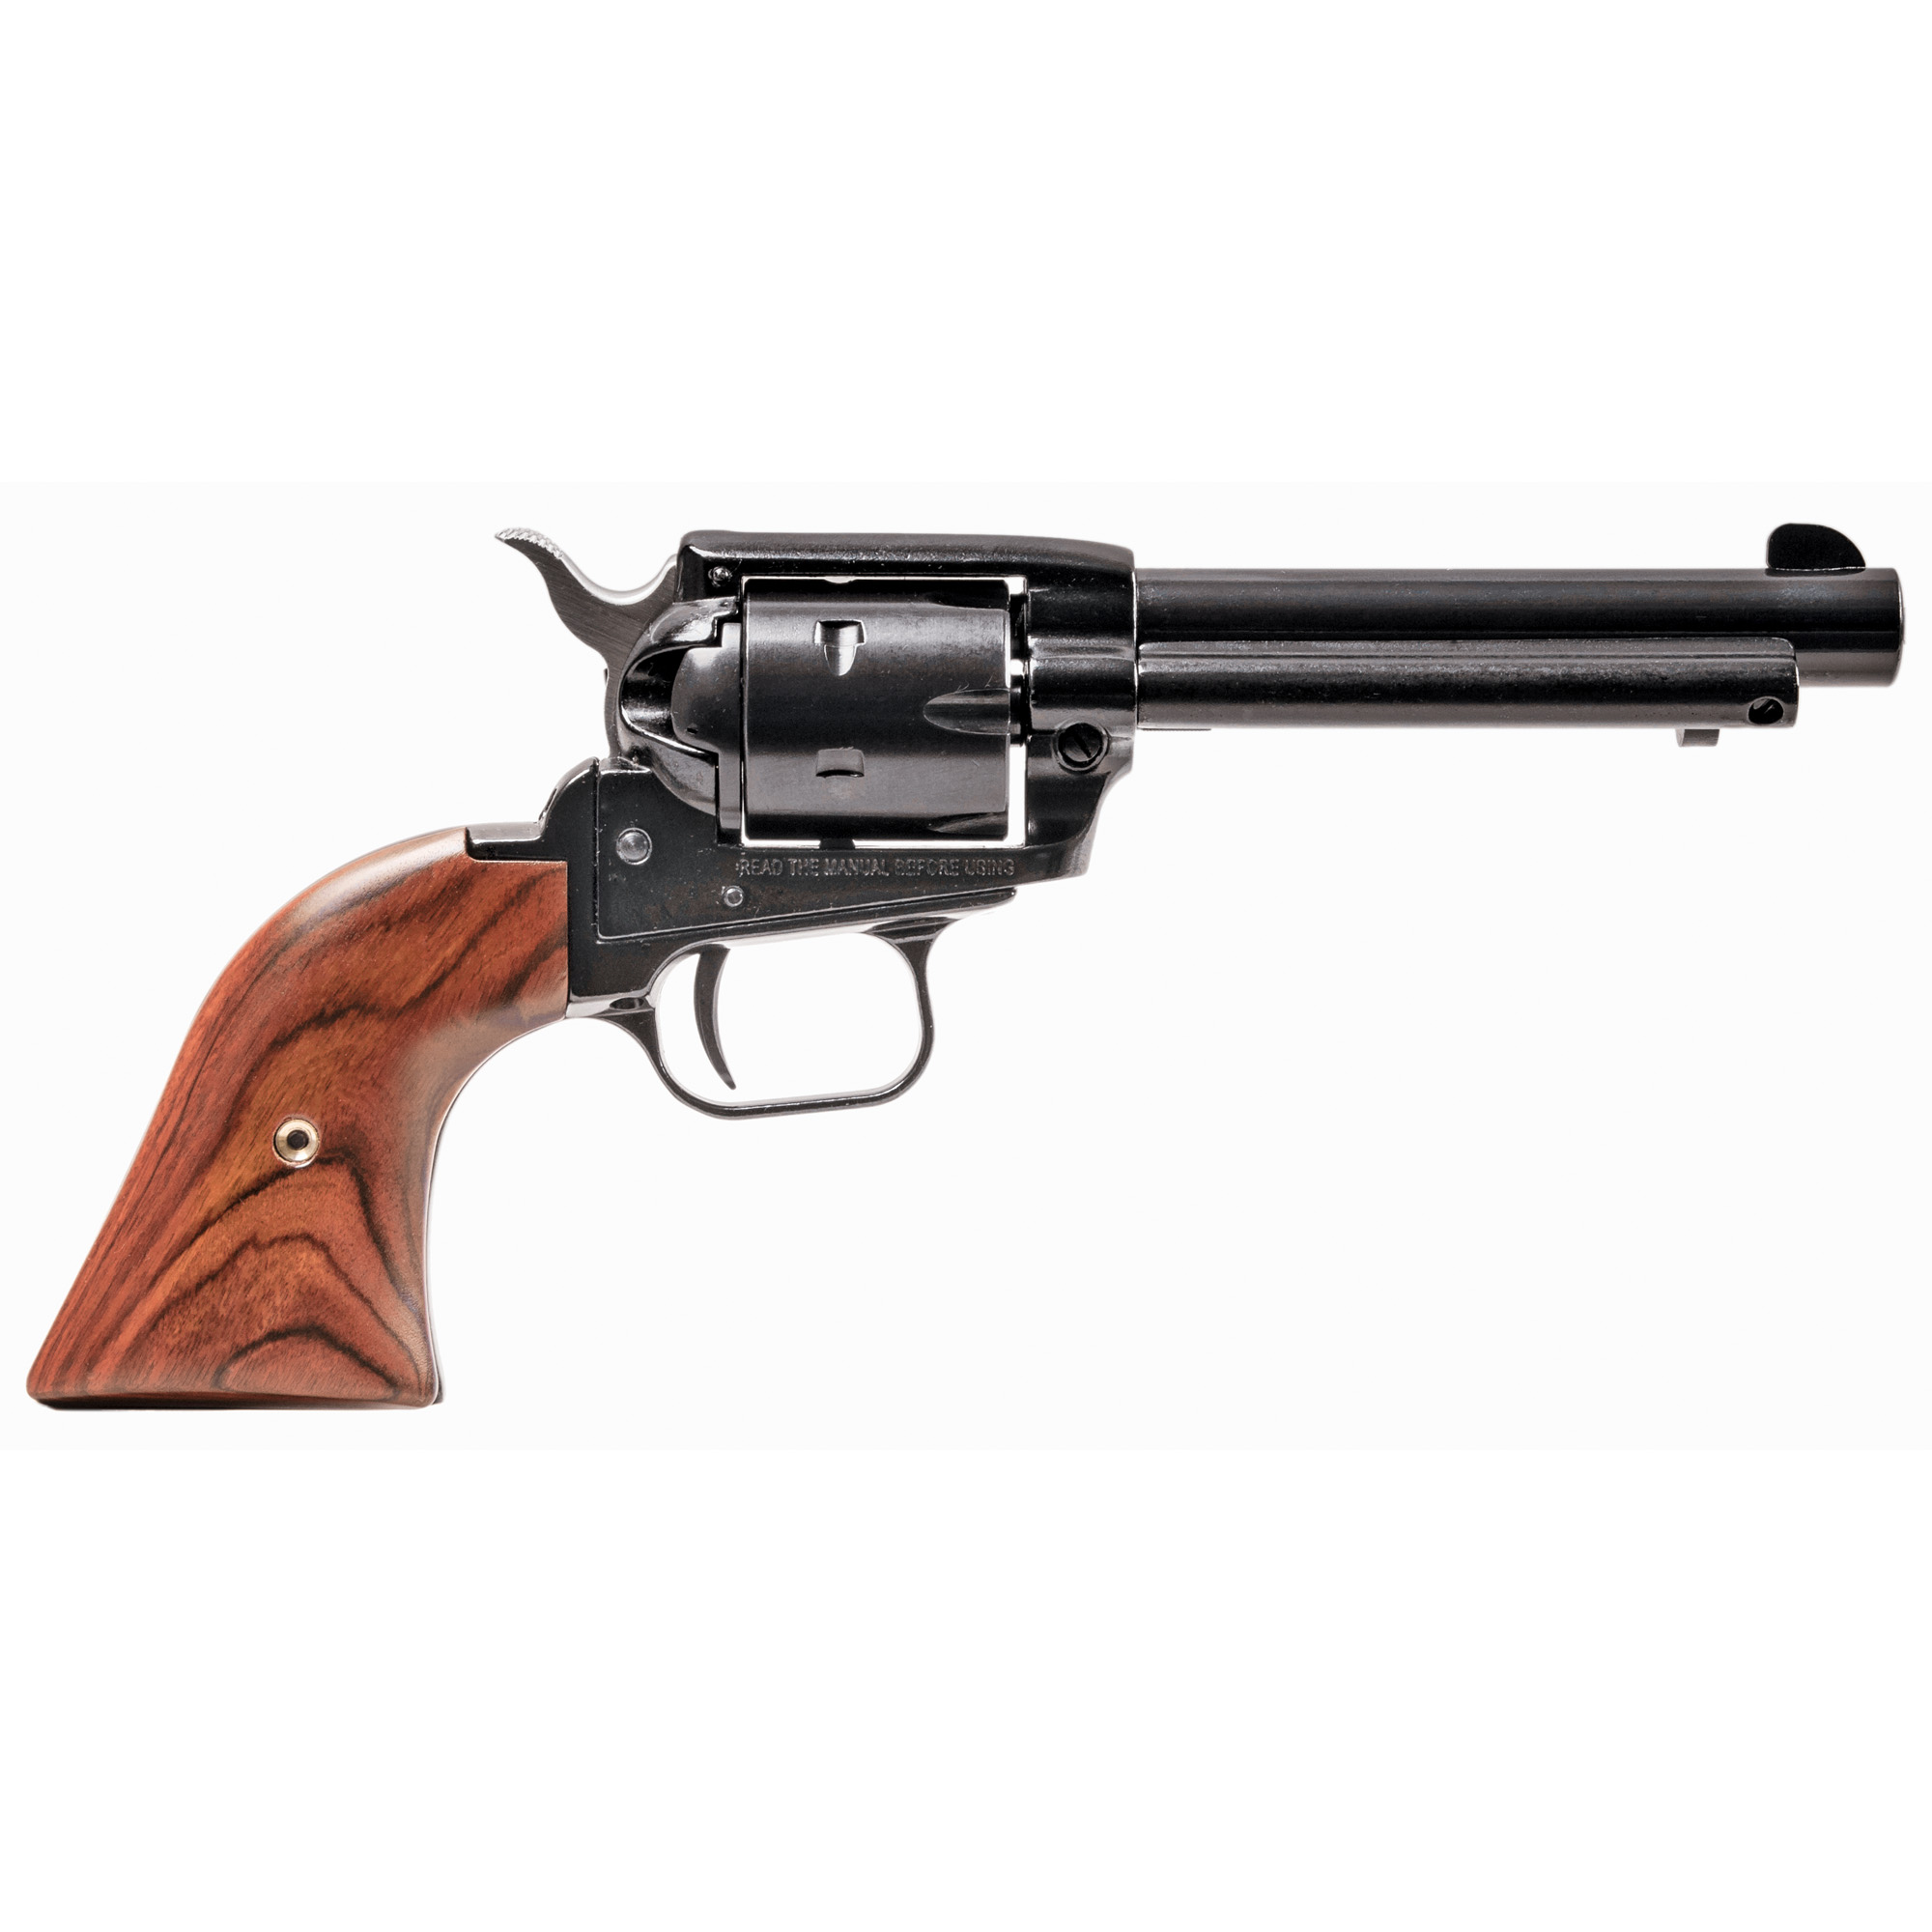 HERITAGE 22LR ONLY 4.75 BL W/COCOB